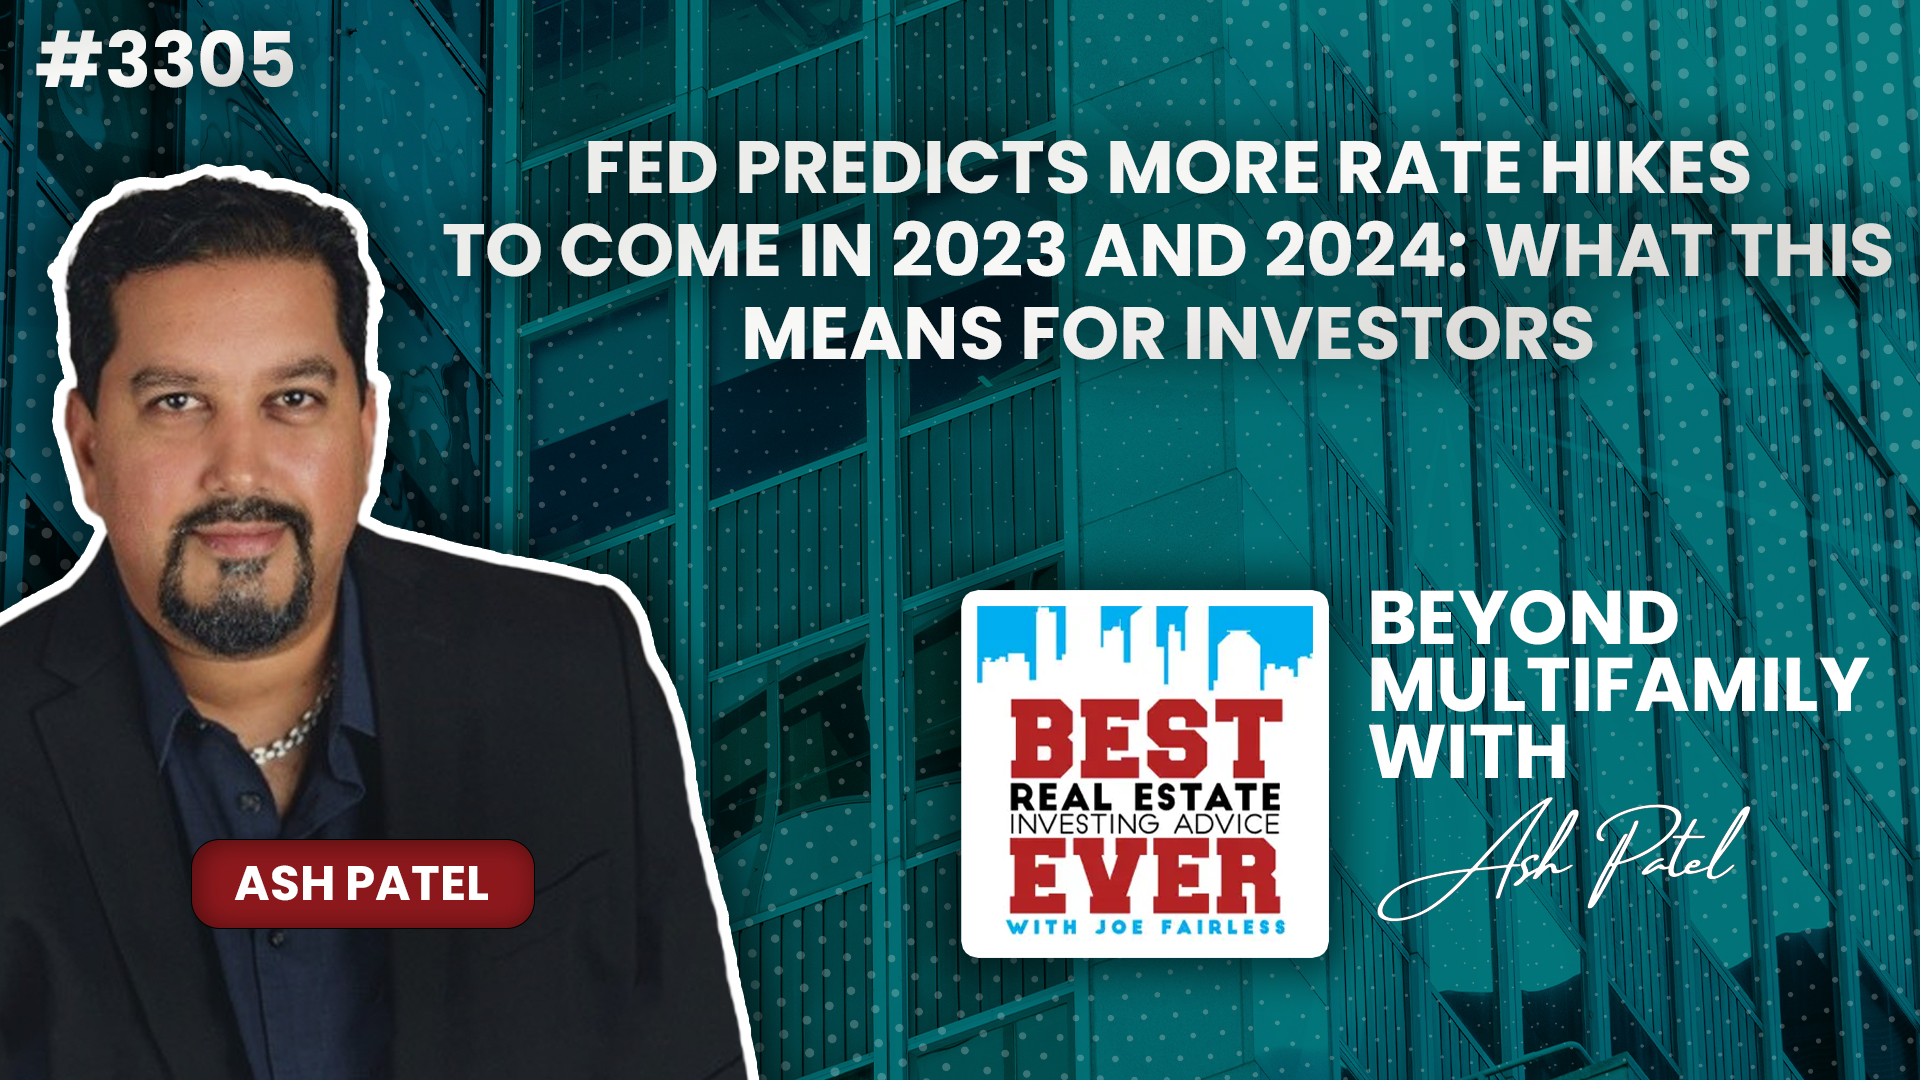 Fed Predicts More Rate Hikes to Come in 2023 and 2024: What This Means for Investors